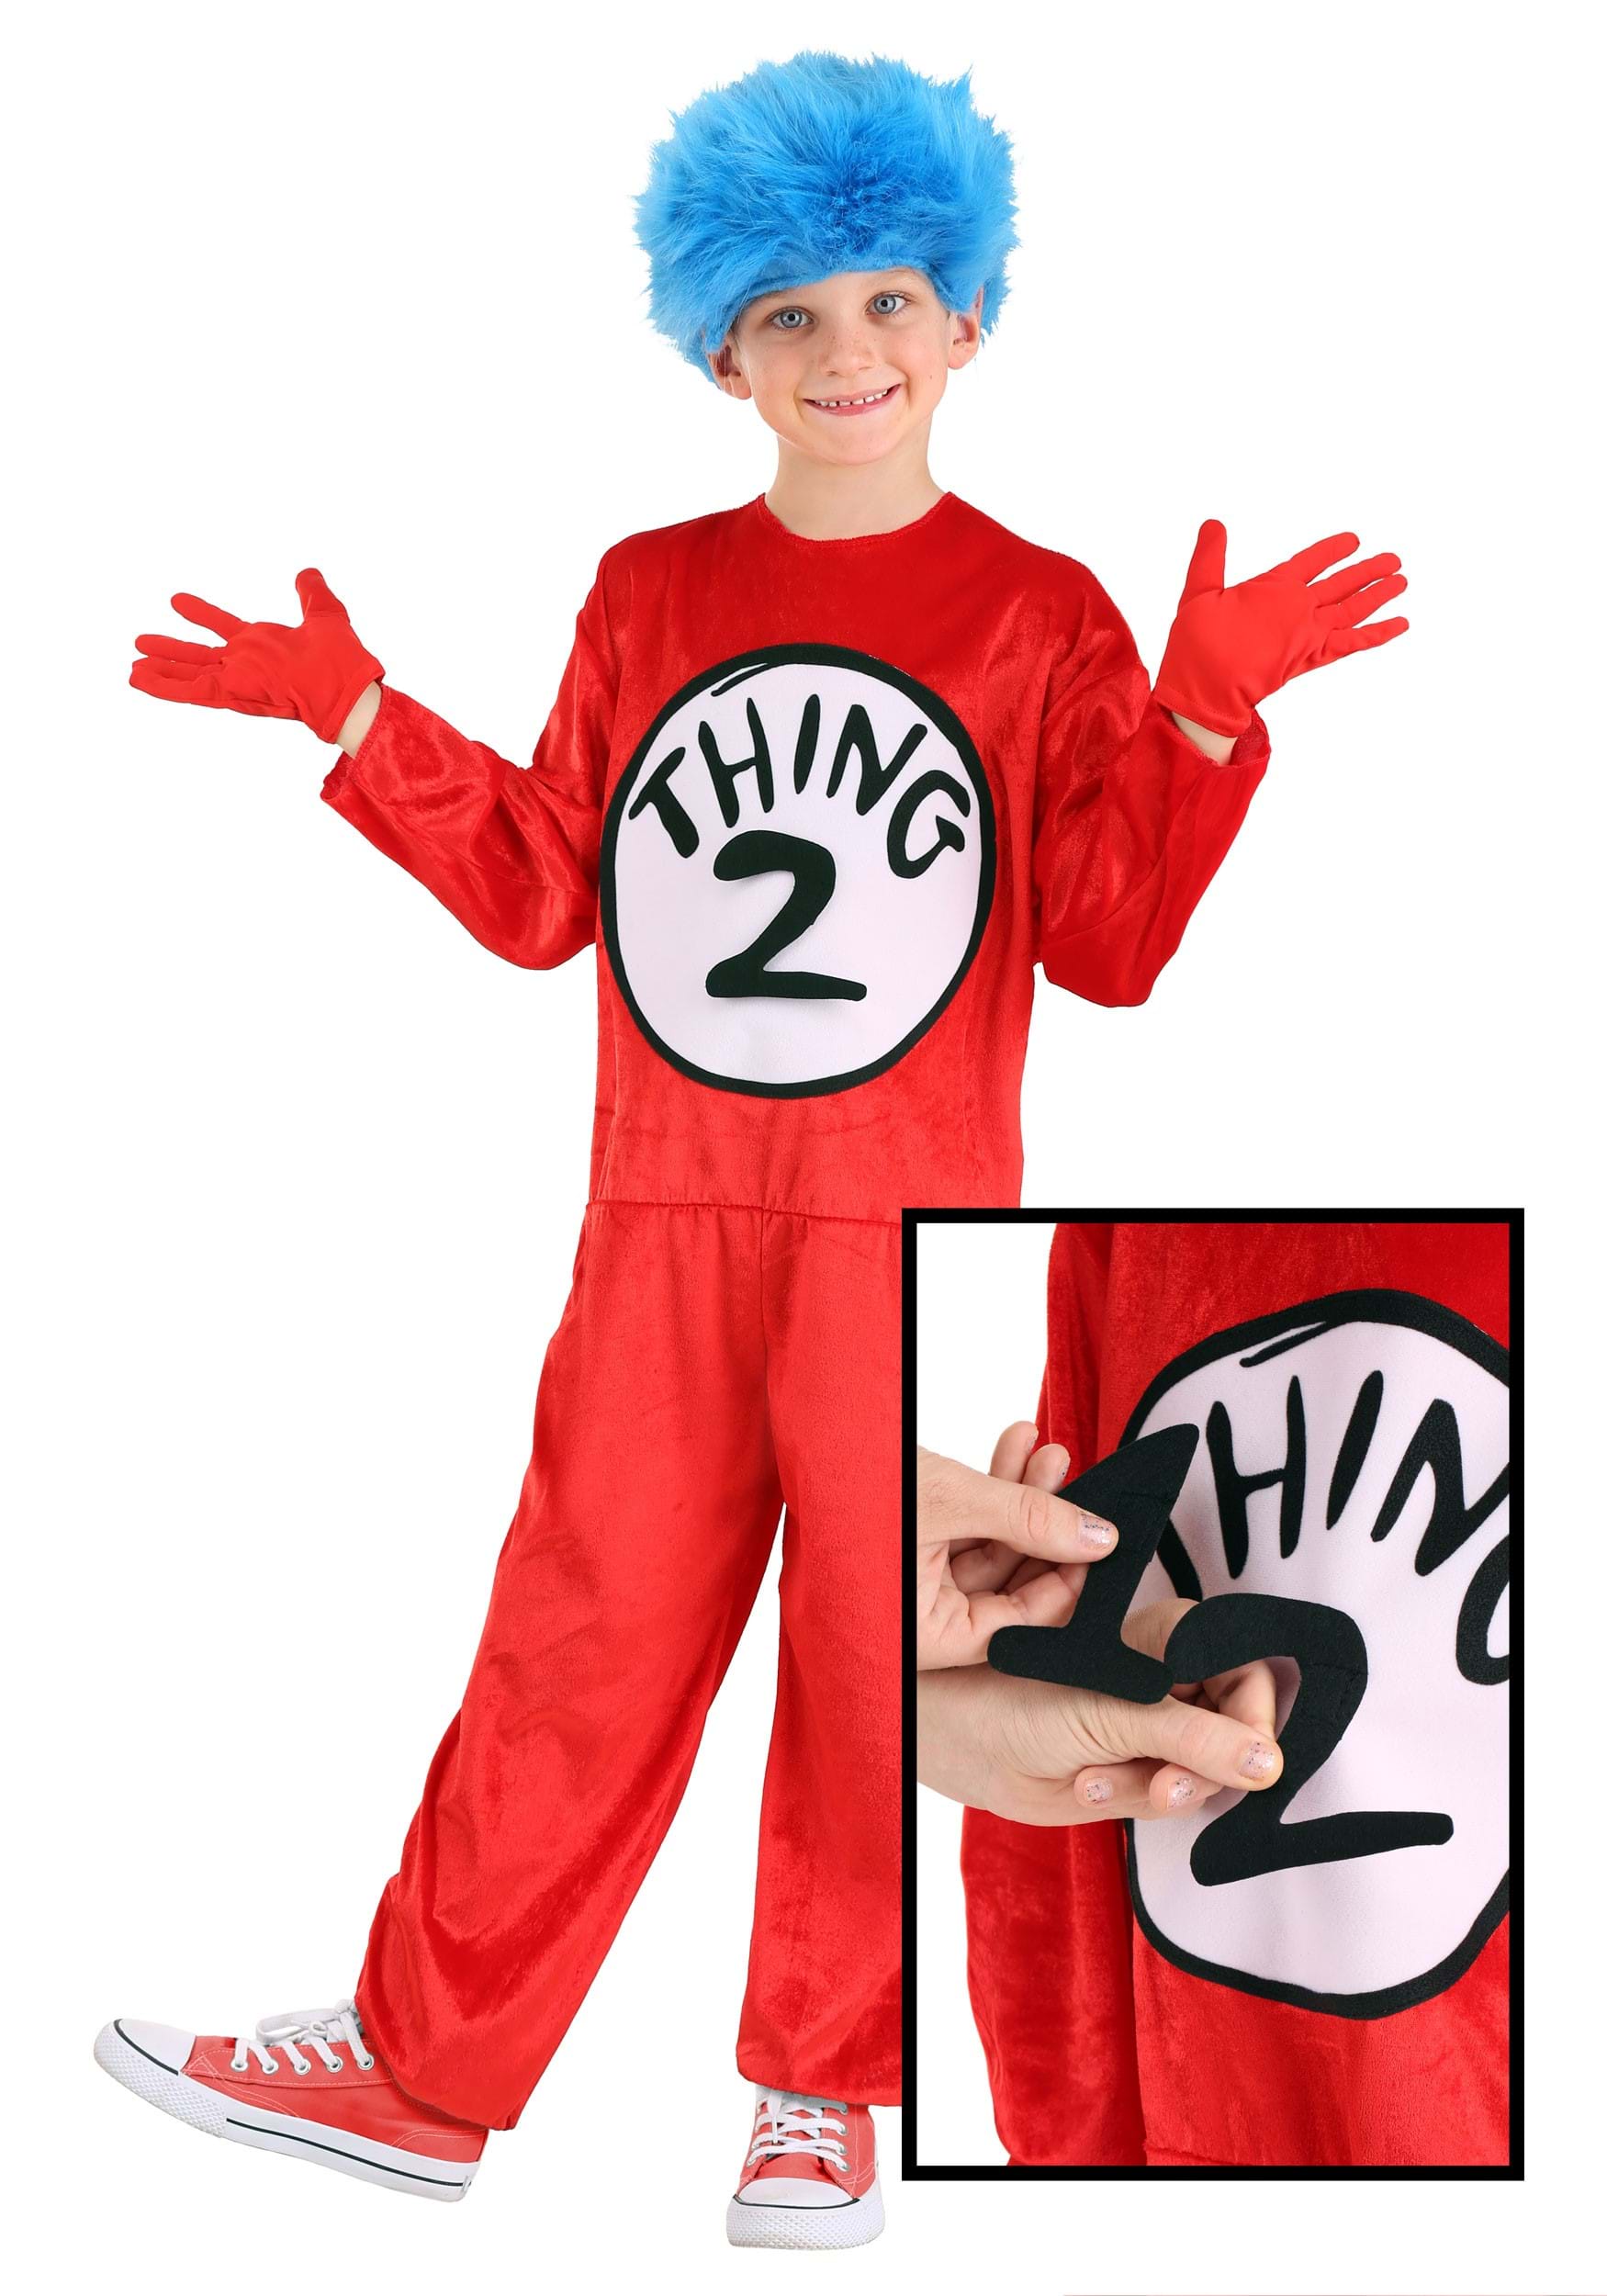 Photos - Fancy Dress FUN Costumes Thing 1 & Thing 2 Kids Costume Blue/Red/White